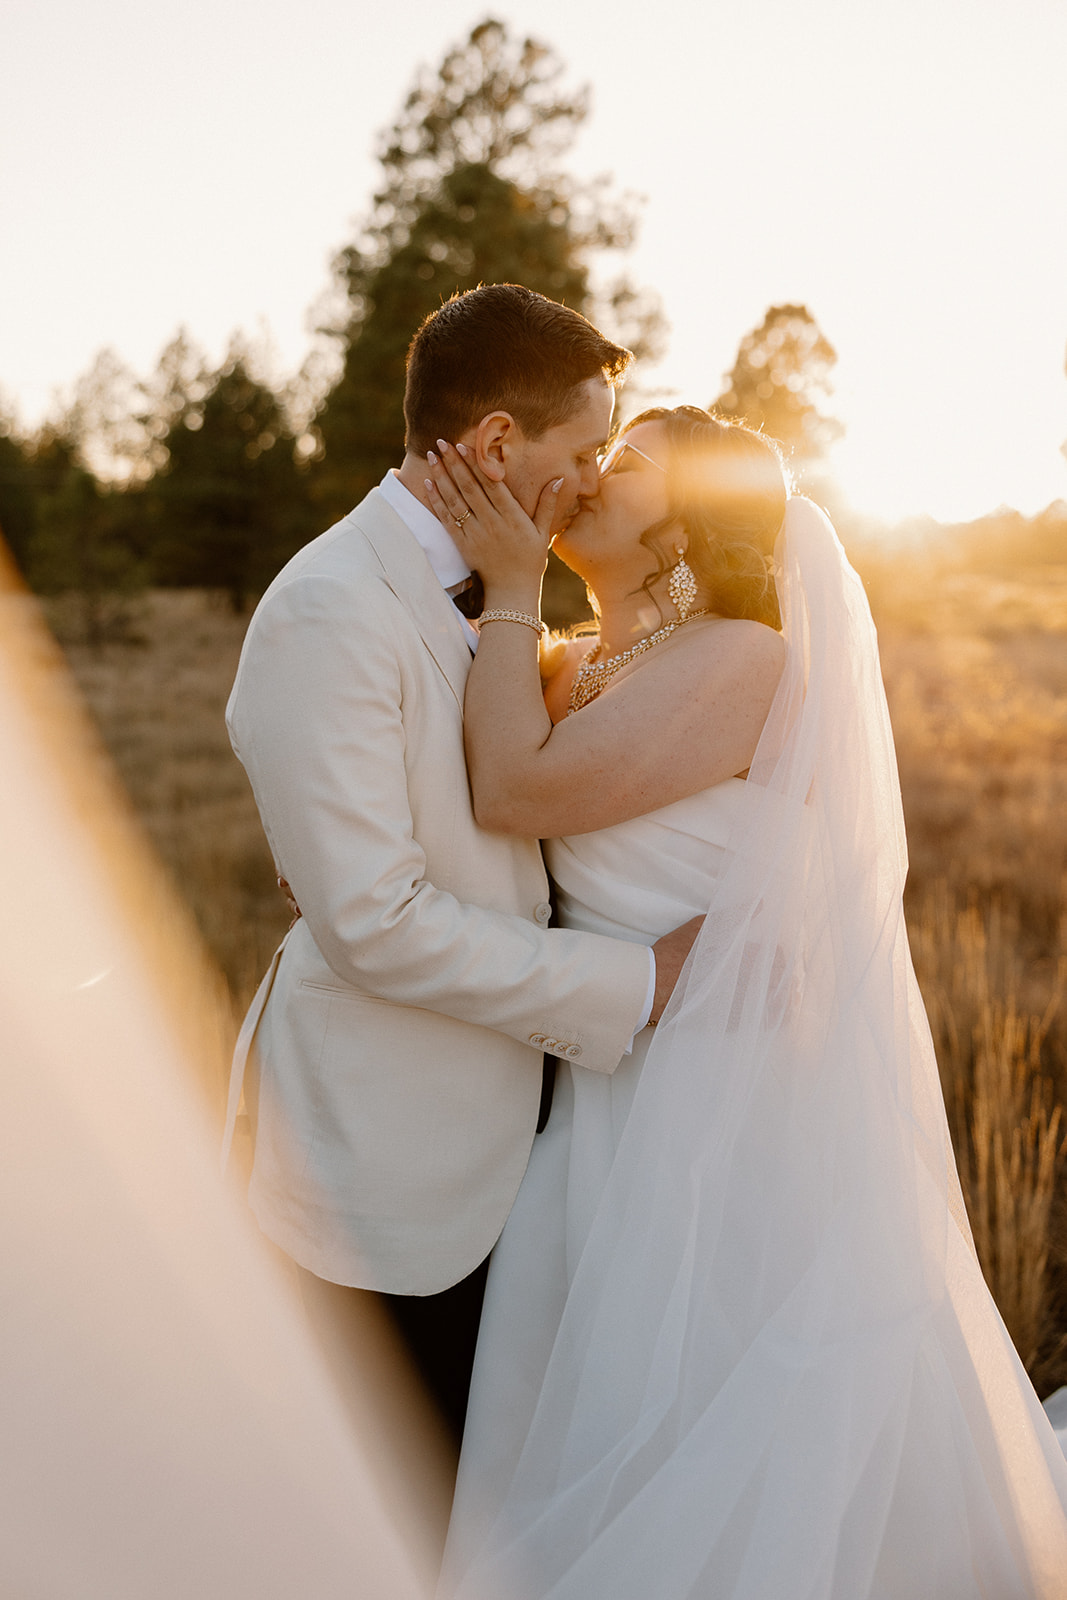 Stunning bride and groom pose together in the Arizona nature